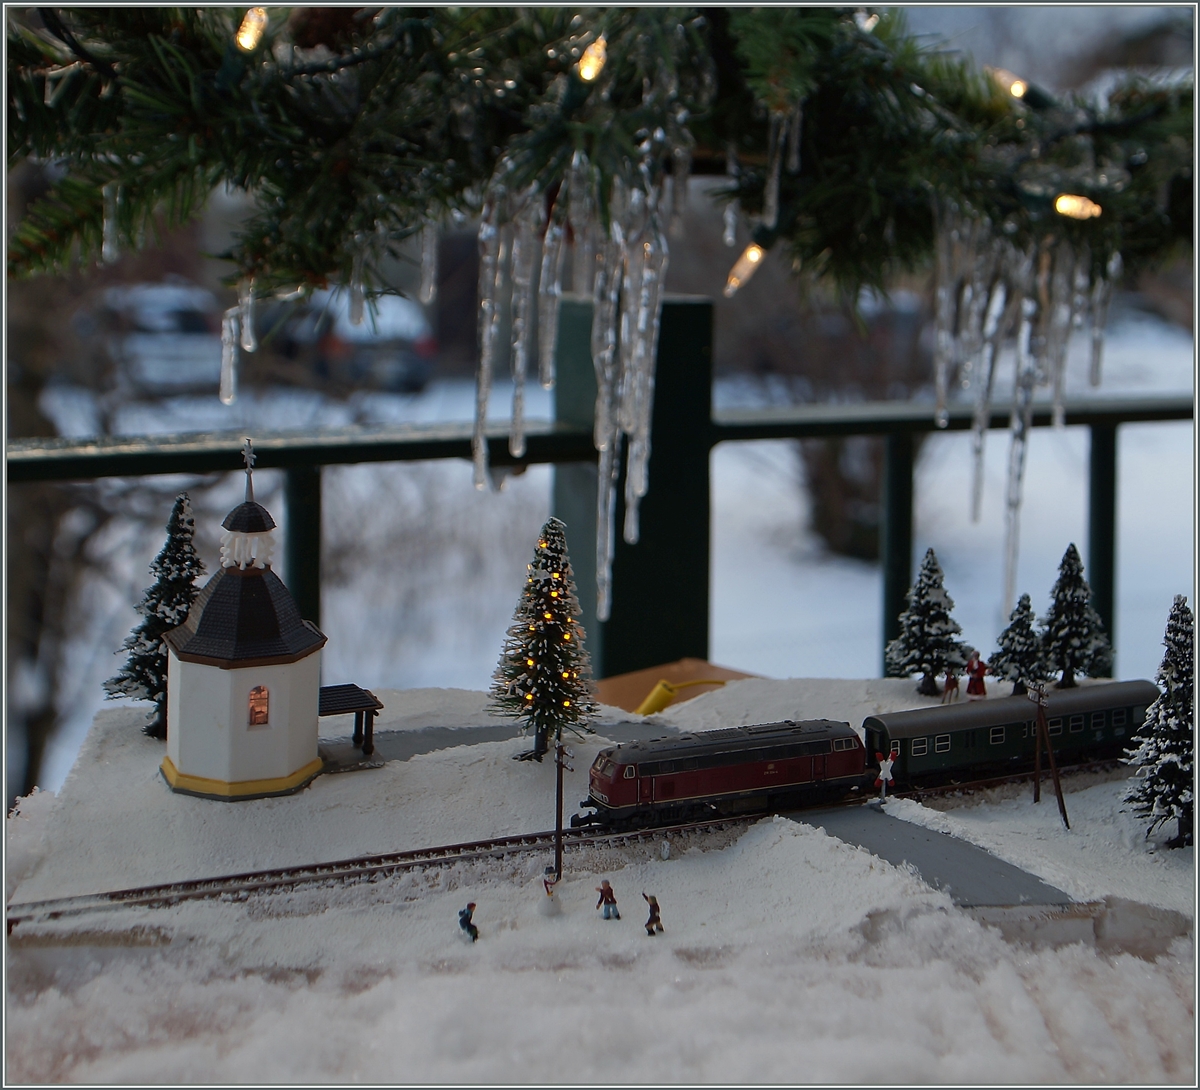 This Sunday is the Day of Model Railraoad: A mini club (Z Gauge) DB V 216 in the winter evening landscape. 22.12.2014